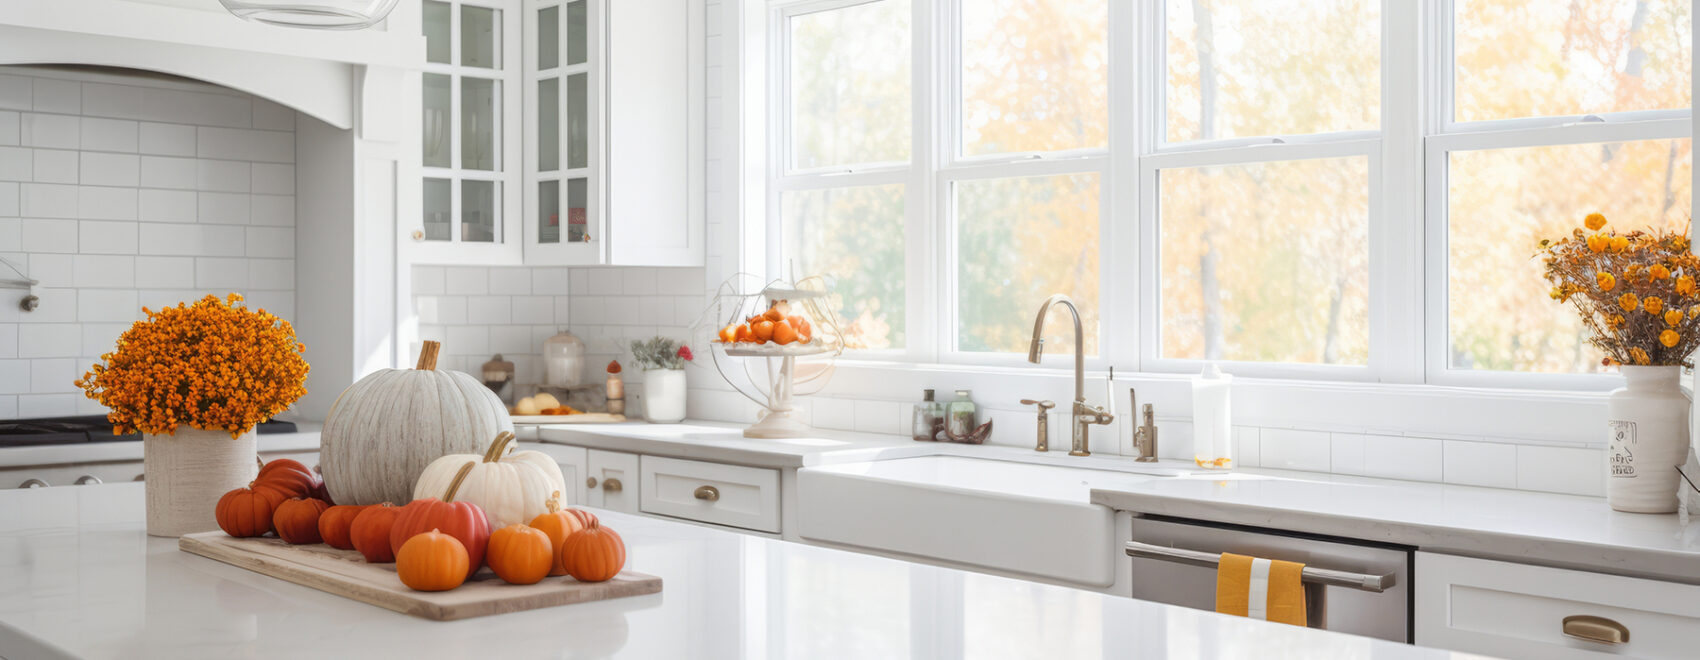 Remodeled kitchen with fall decor